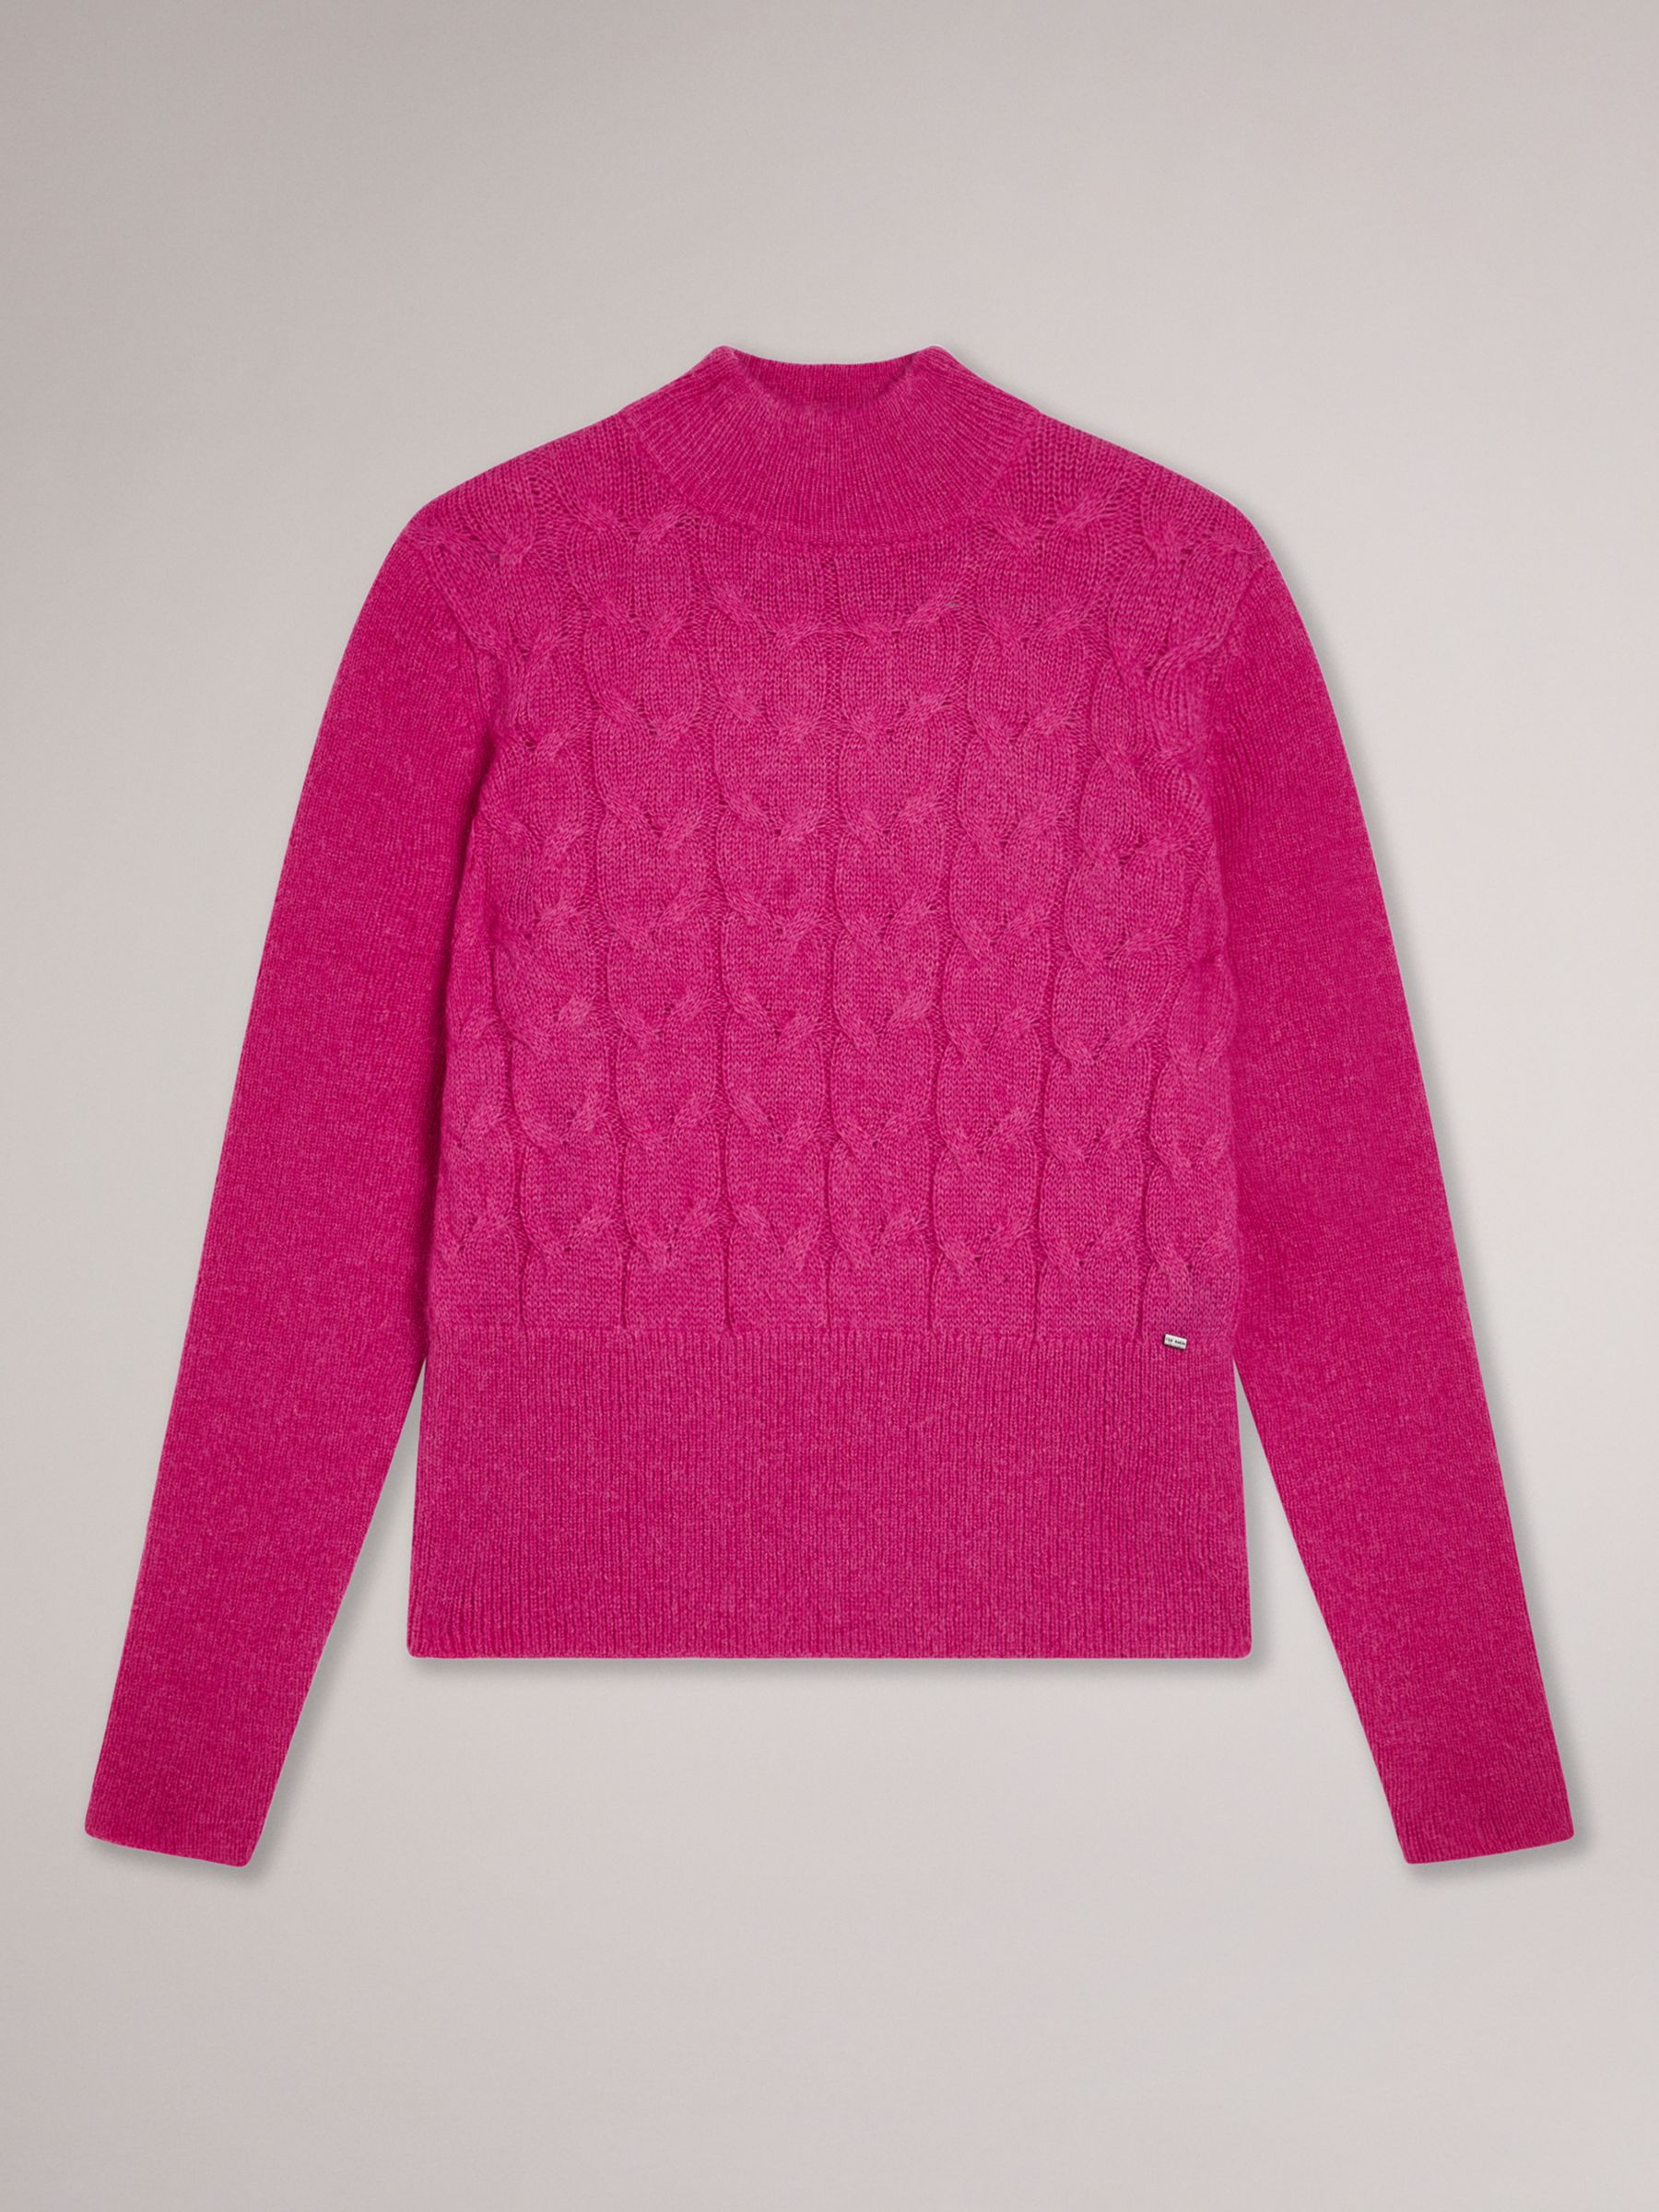 Ted Baker Veolaa Mohair Blend Cable Knit Jumper, Bright Pink, 6